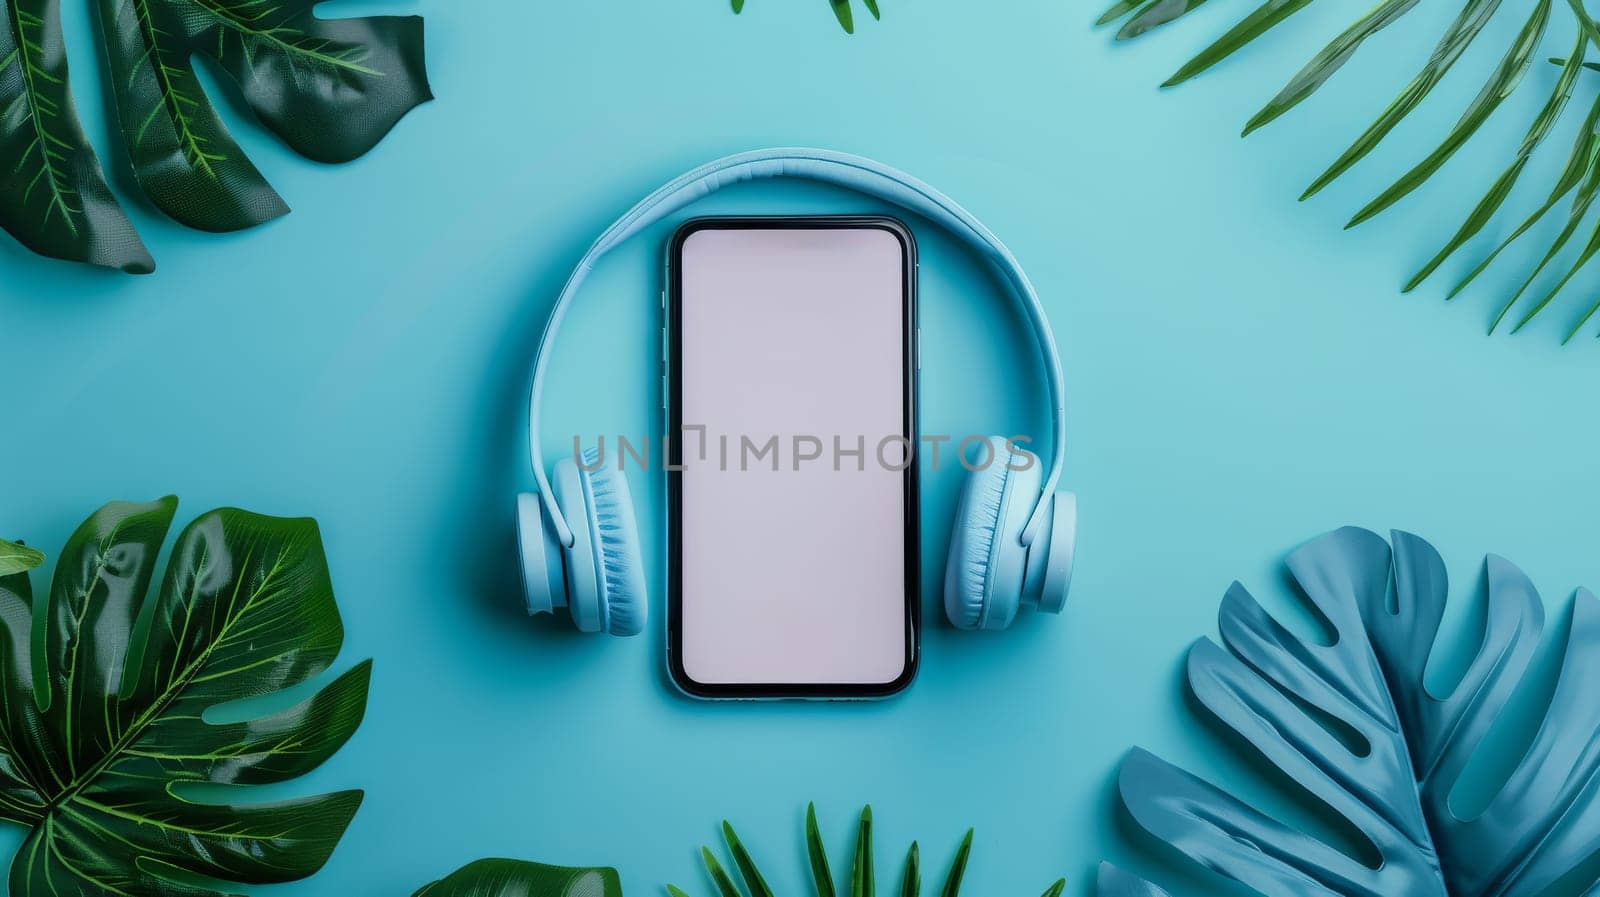 A phone and headphones are on a blue background